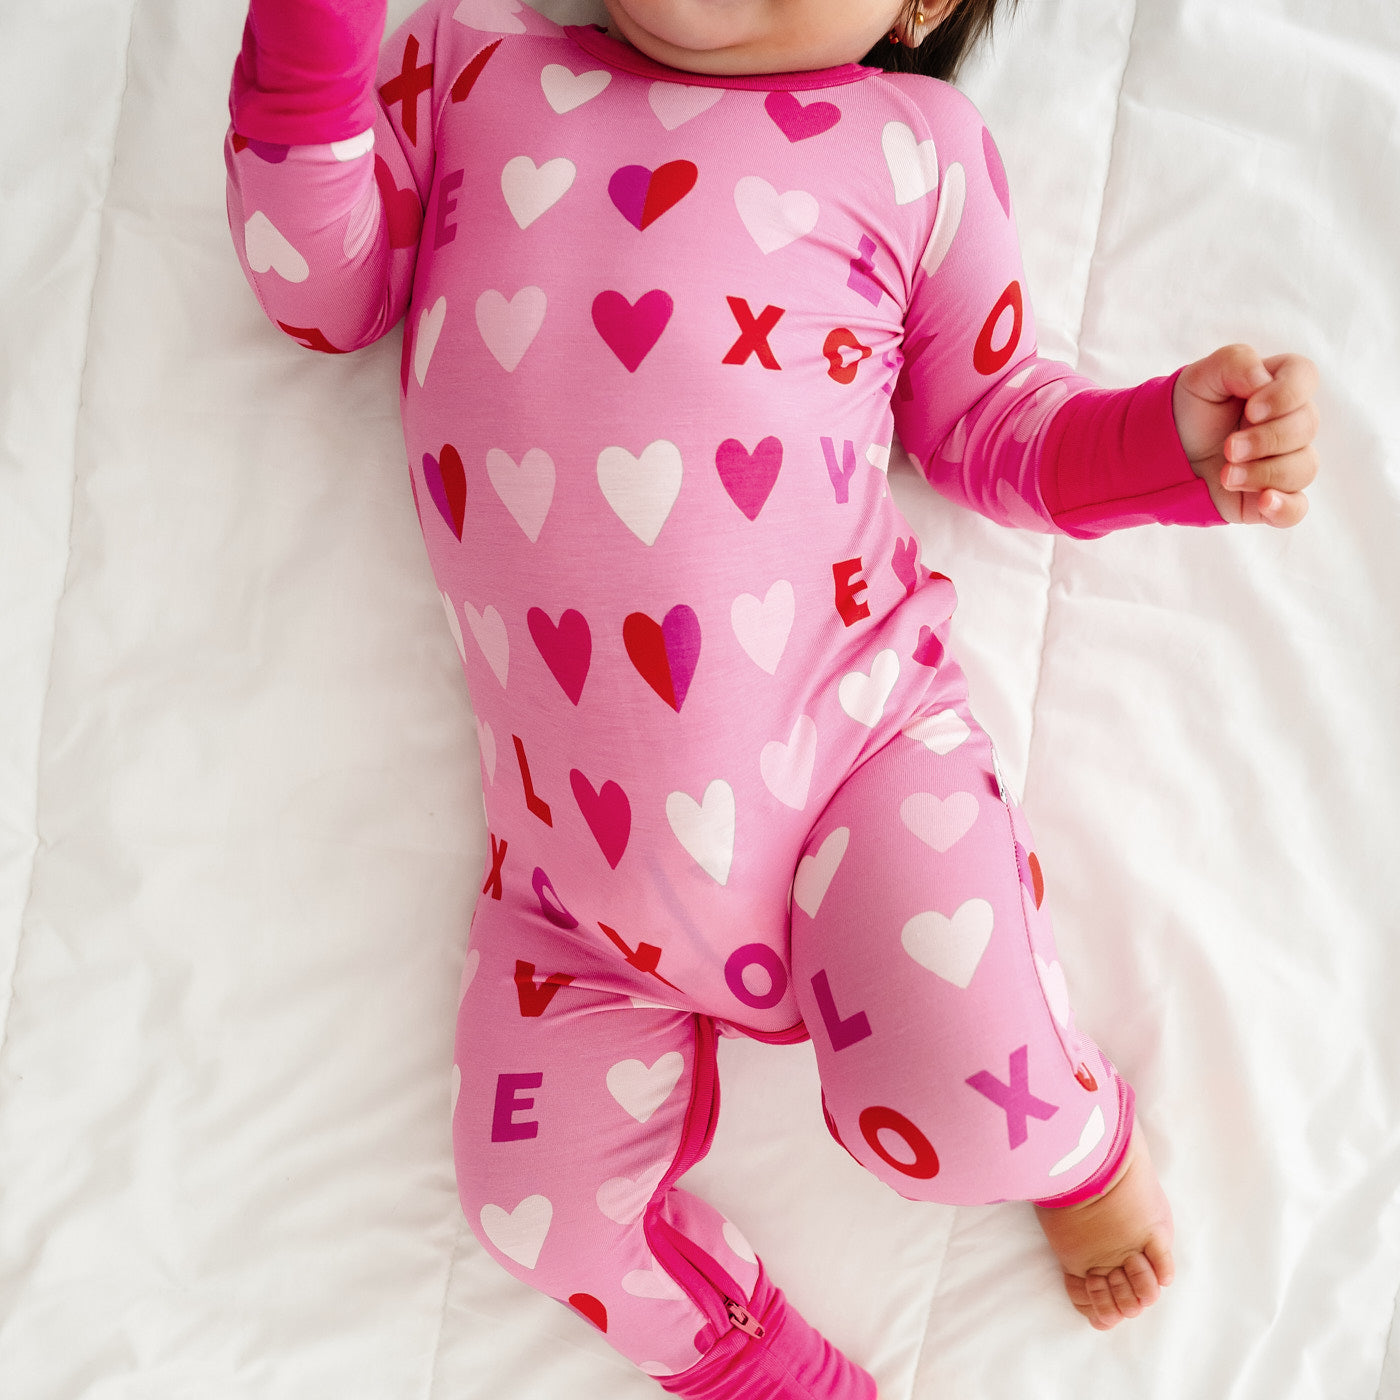 Alternate image of a child laying on a bed wearing a Pink XOXO crescent zippy showing off the leg zipper